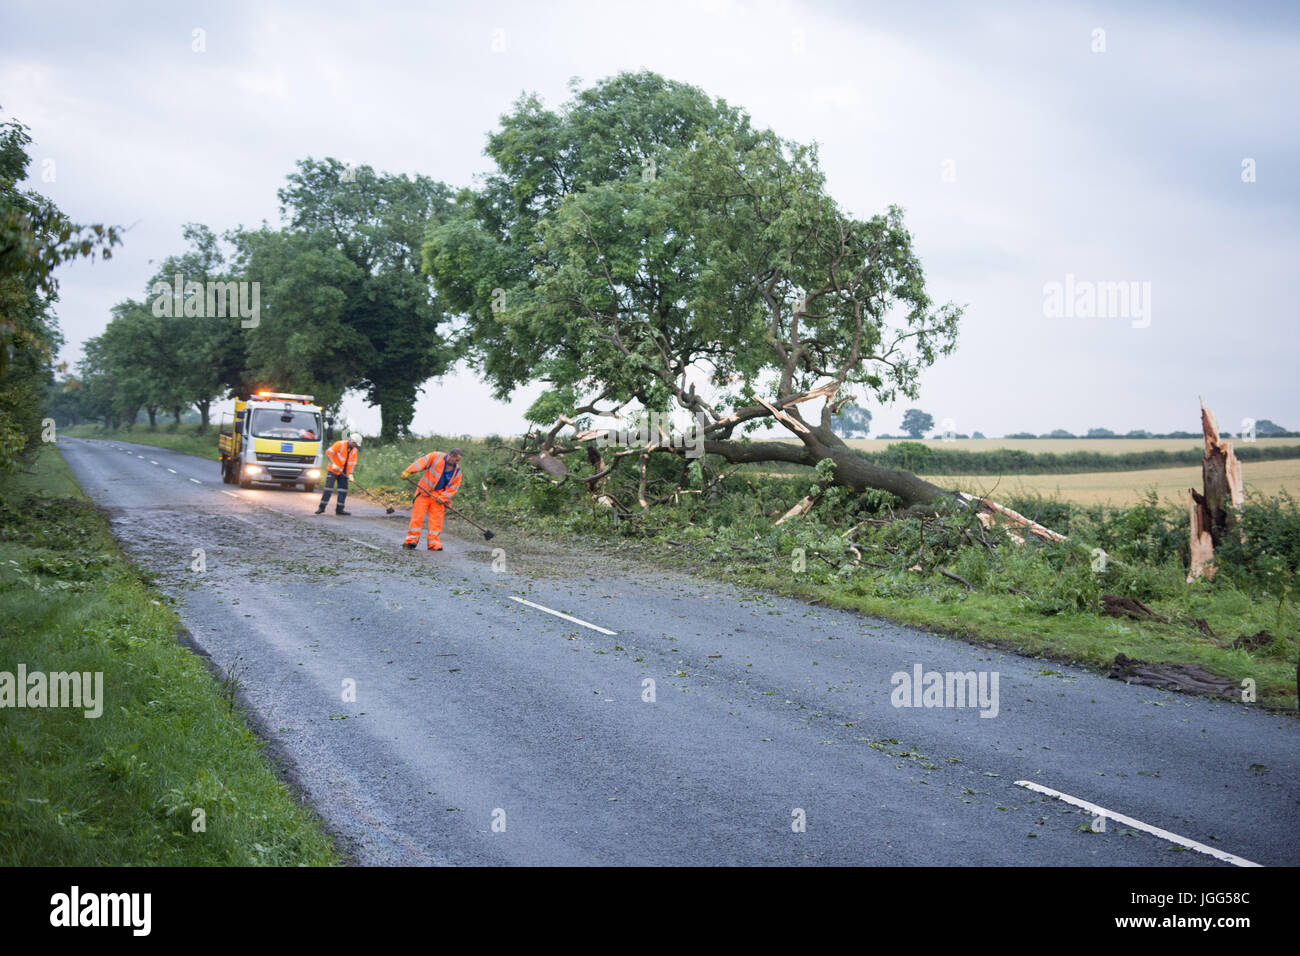 The B1248 was closed after a storm struck a tree and it felled across the road. Credit: Richard Smith/Alamy Live News Stock Photo